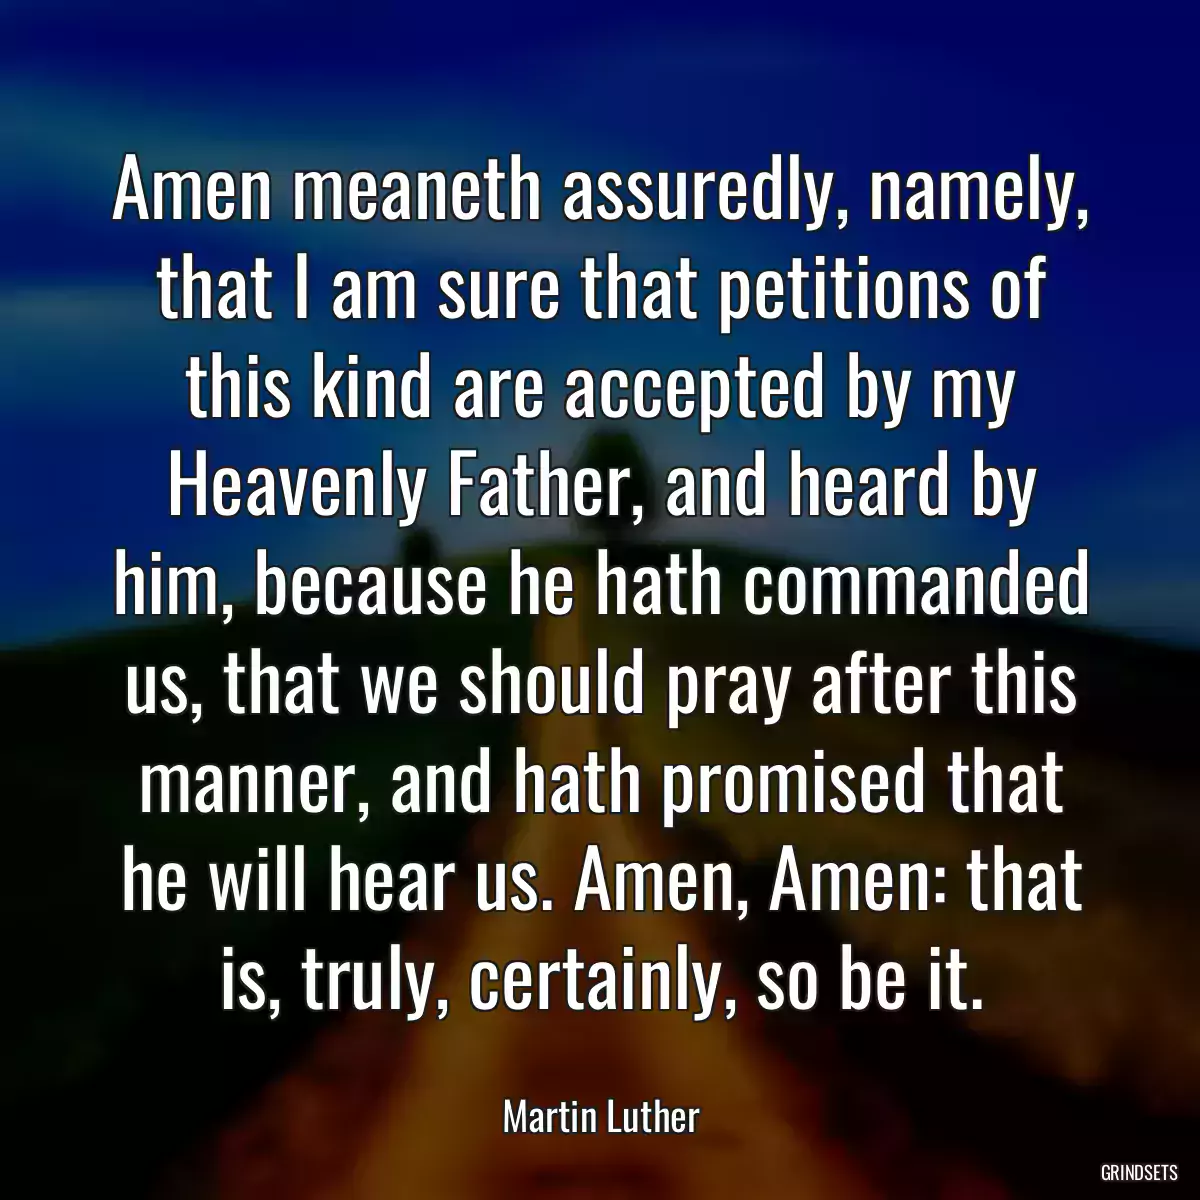 Amen meaneth assuredly, namely, that I am sure that petitions of this kind are accepted by my Heavenly Father, and heard by him, because he hath commanded us, that we should pray after this manner, and hath promised that he will hear us. Amen, Amen: that is, truly, certainly, so be it.